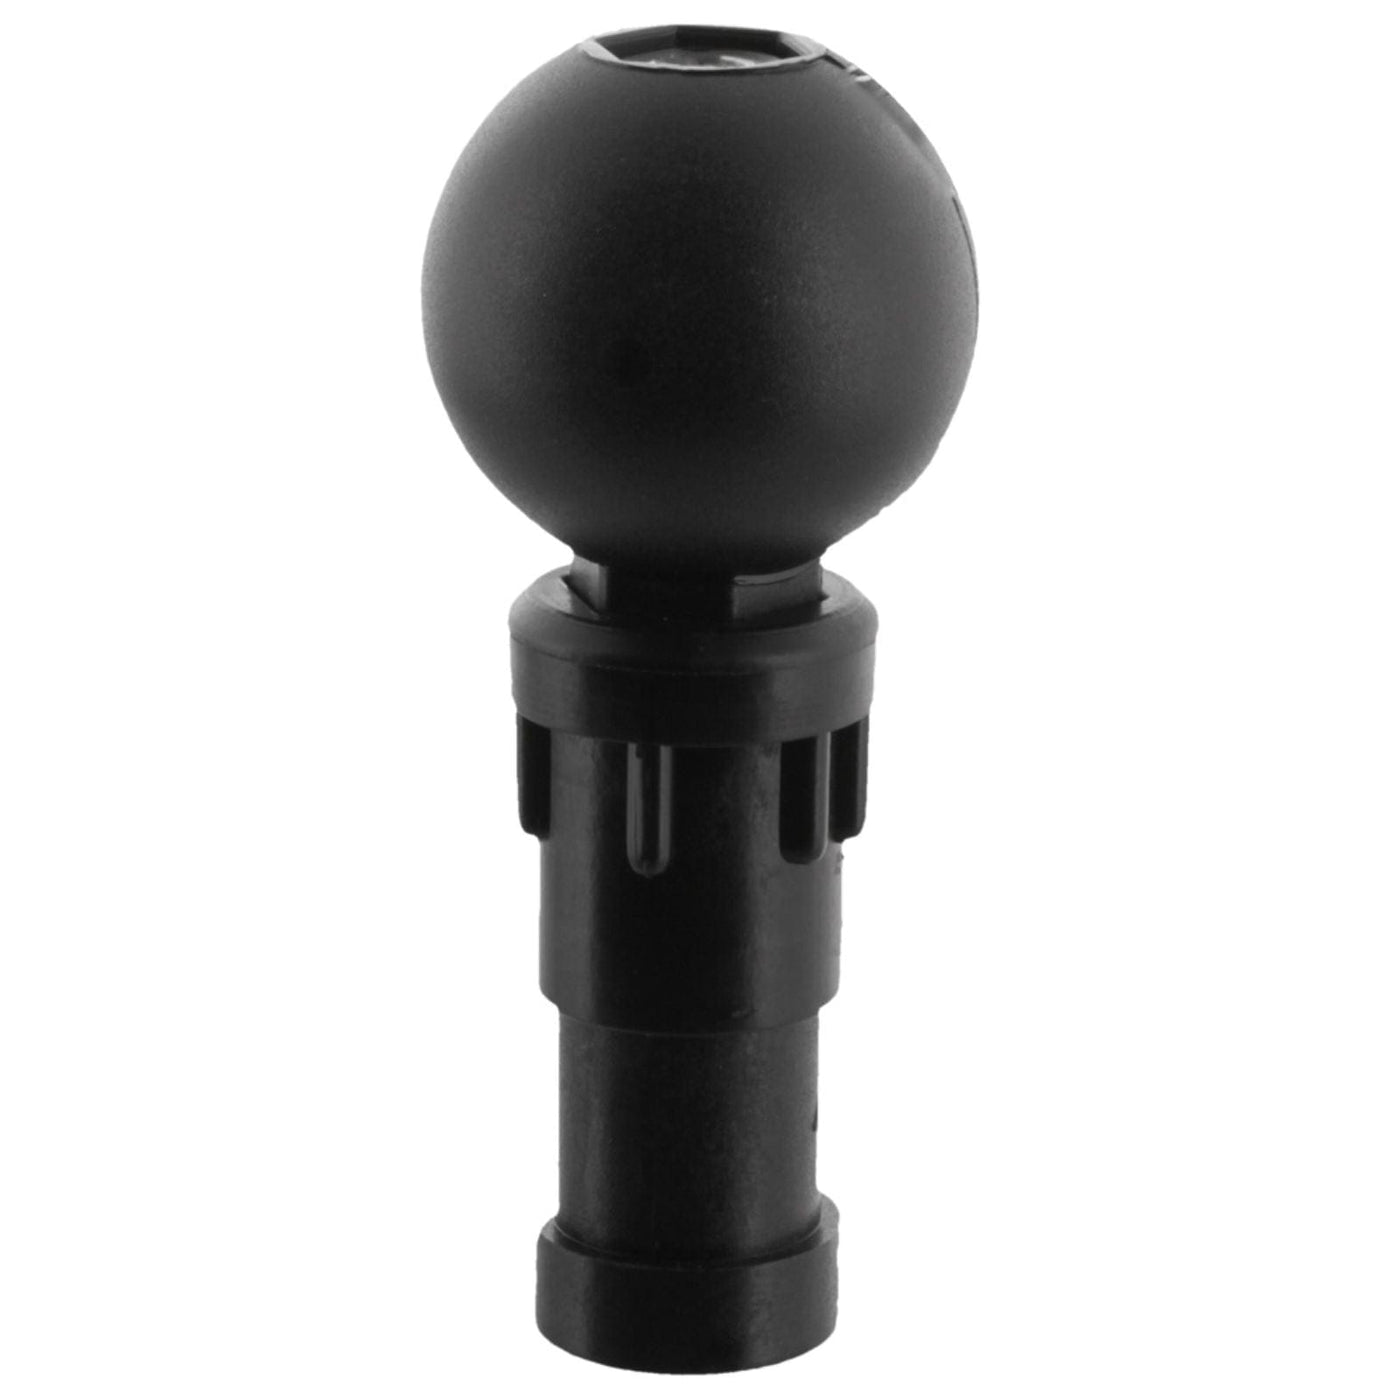 Scotty Scotty 1.5 Inch Ball with Post Marine And Water Sports